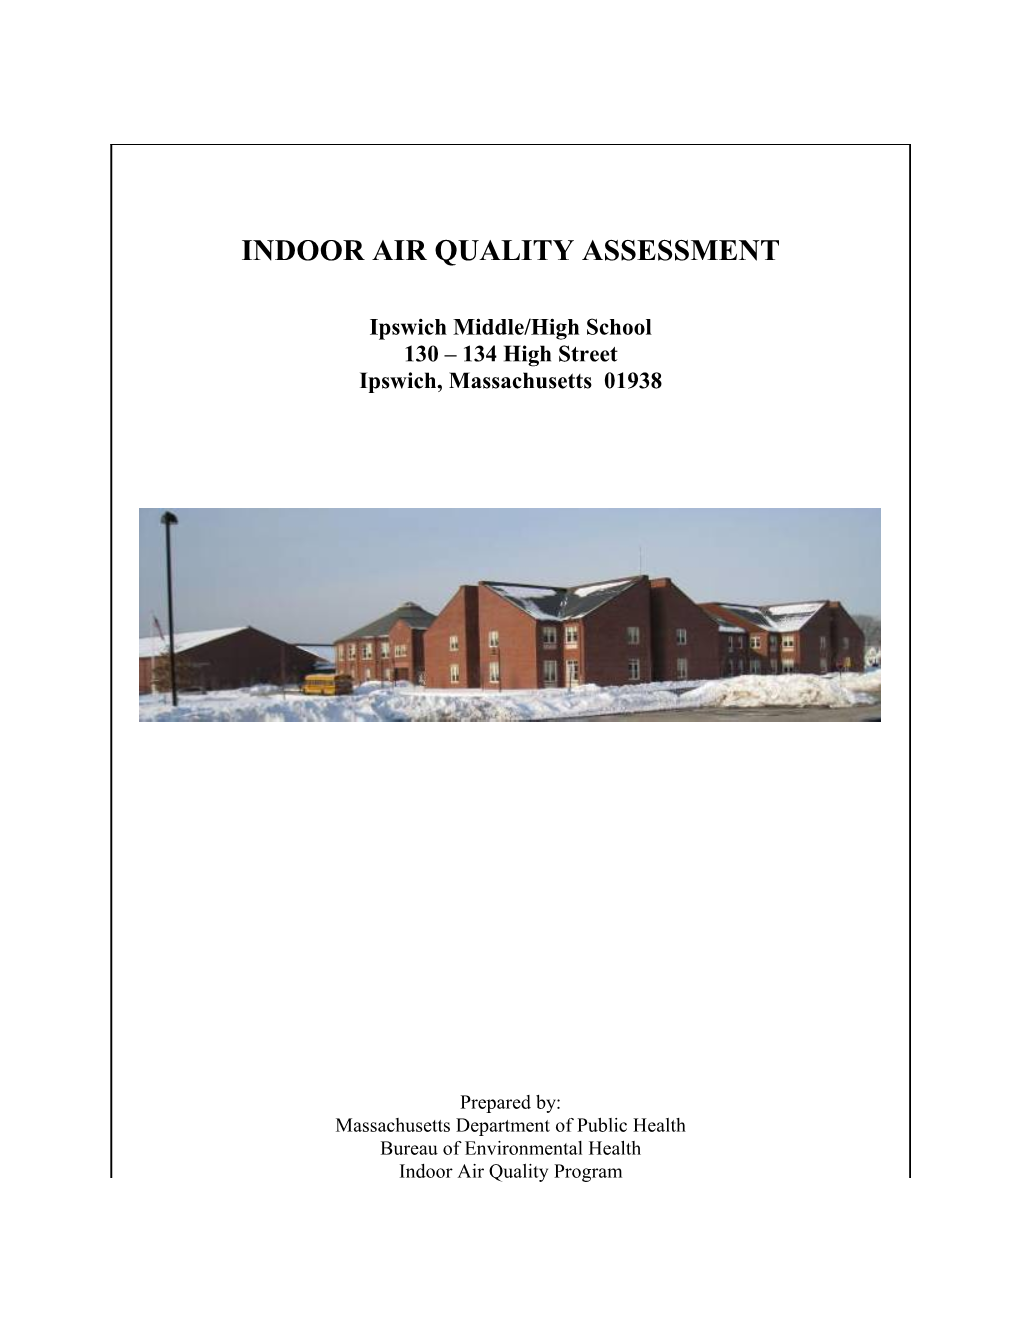 INDOOR AIR QUALITY ASSESSMENT - Ipswich Middle/High School